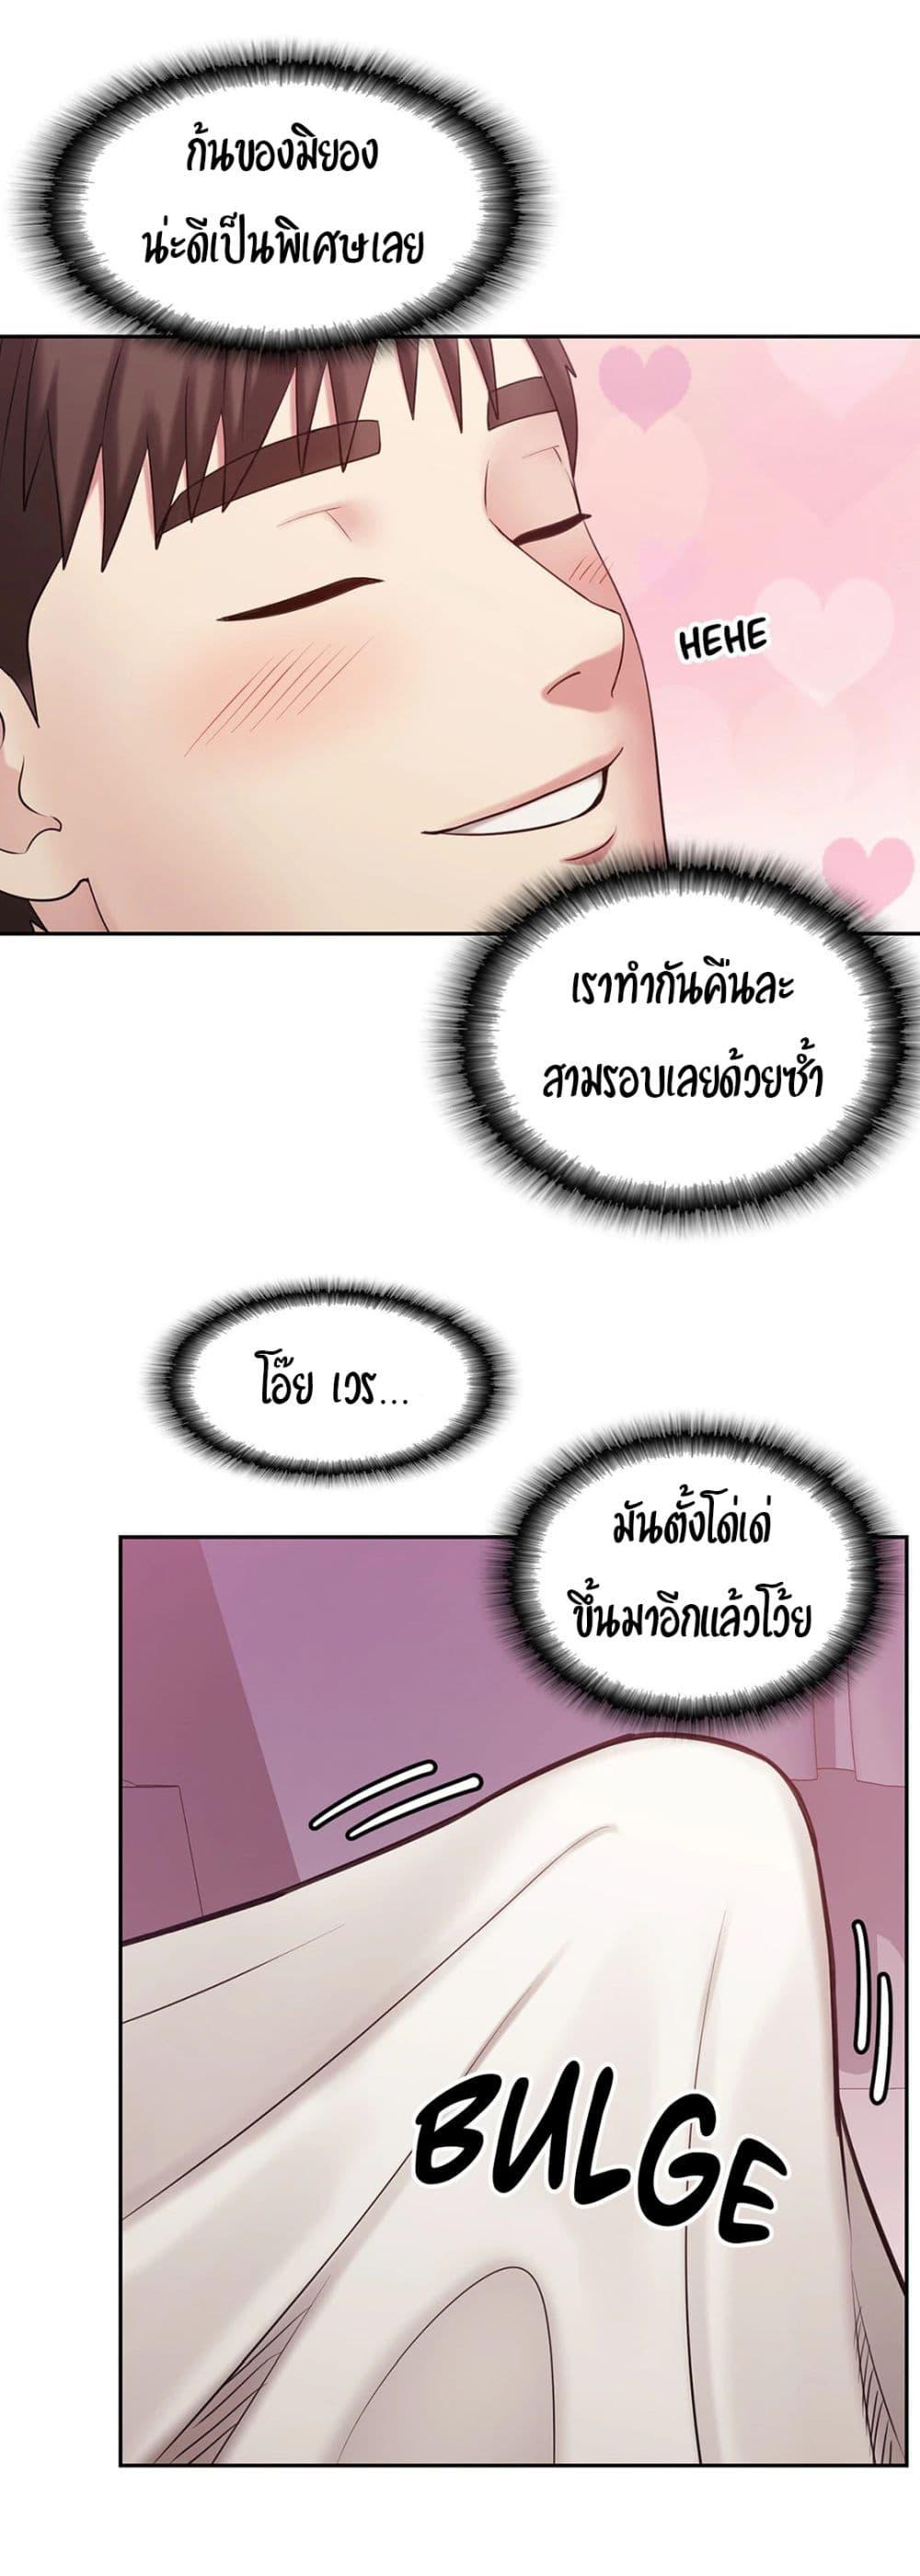 Sexual Consulting 1 ภาพ 55